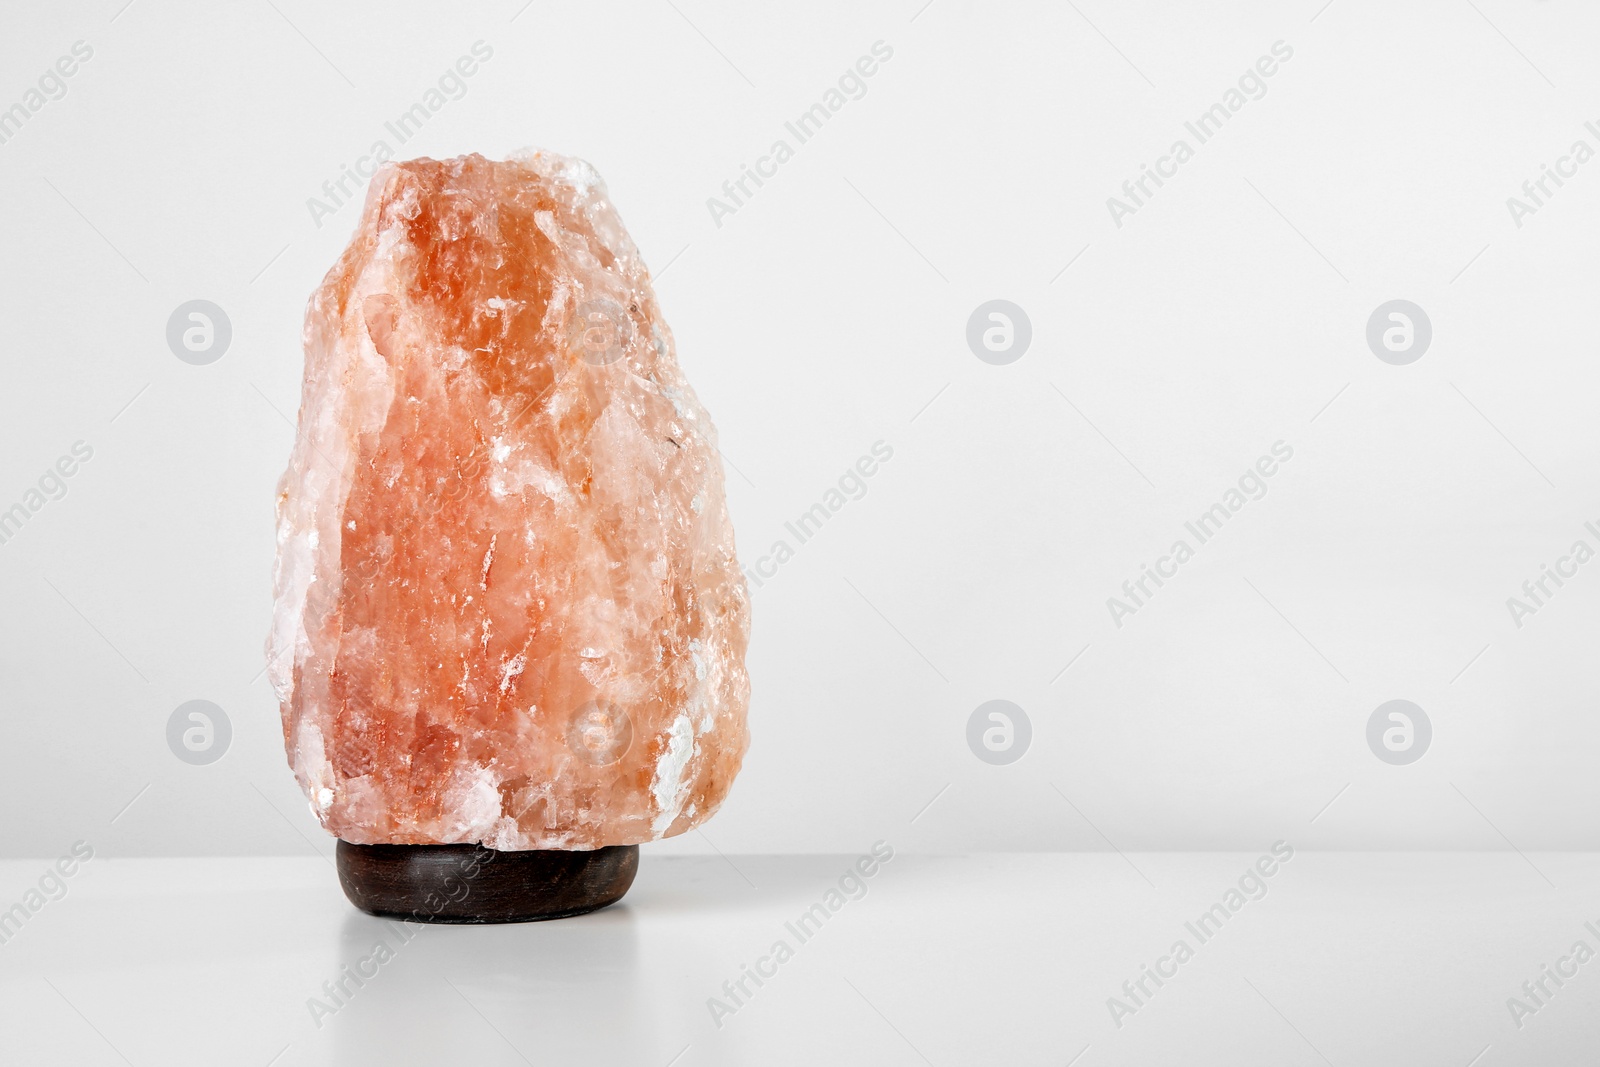 Photo of Himalayan salt lamp on table against light background